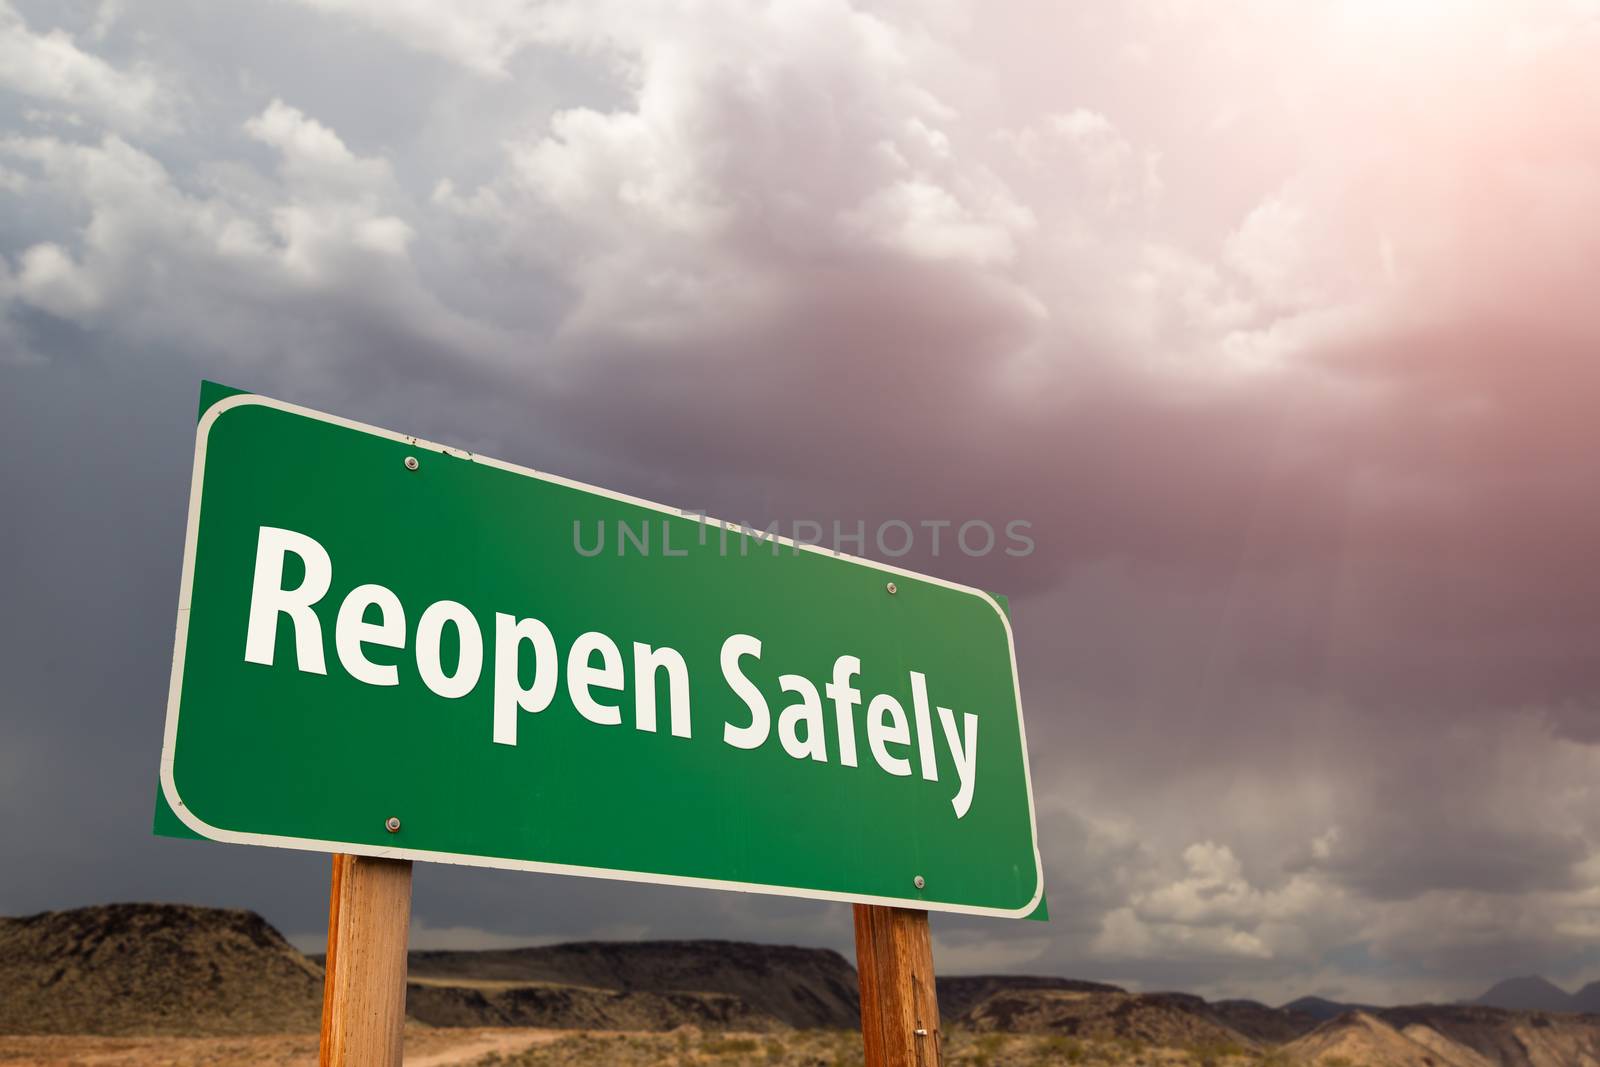 Reopen Safely Green Road Sign Against Ominous Stormy Cloudy Sky by Feverpitched